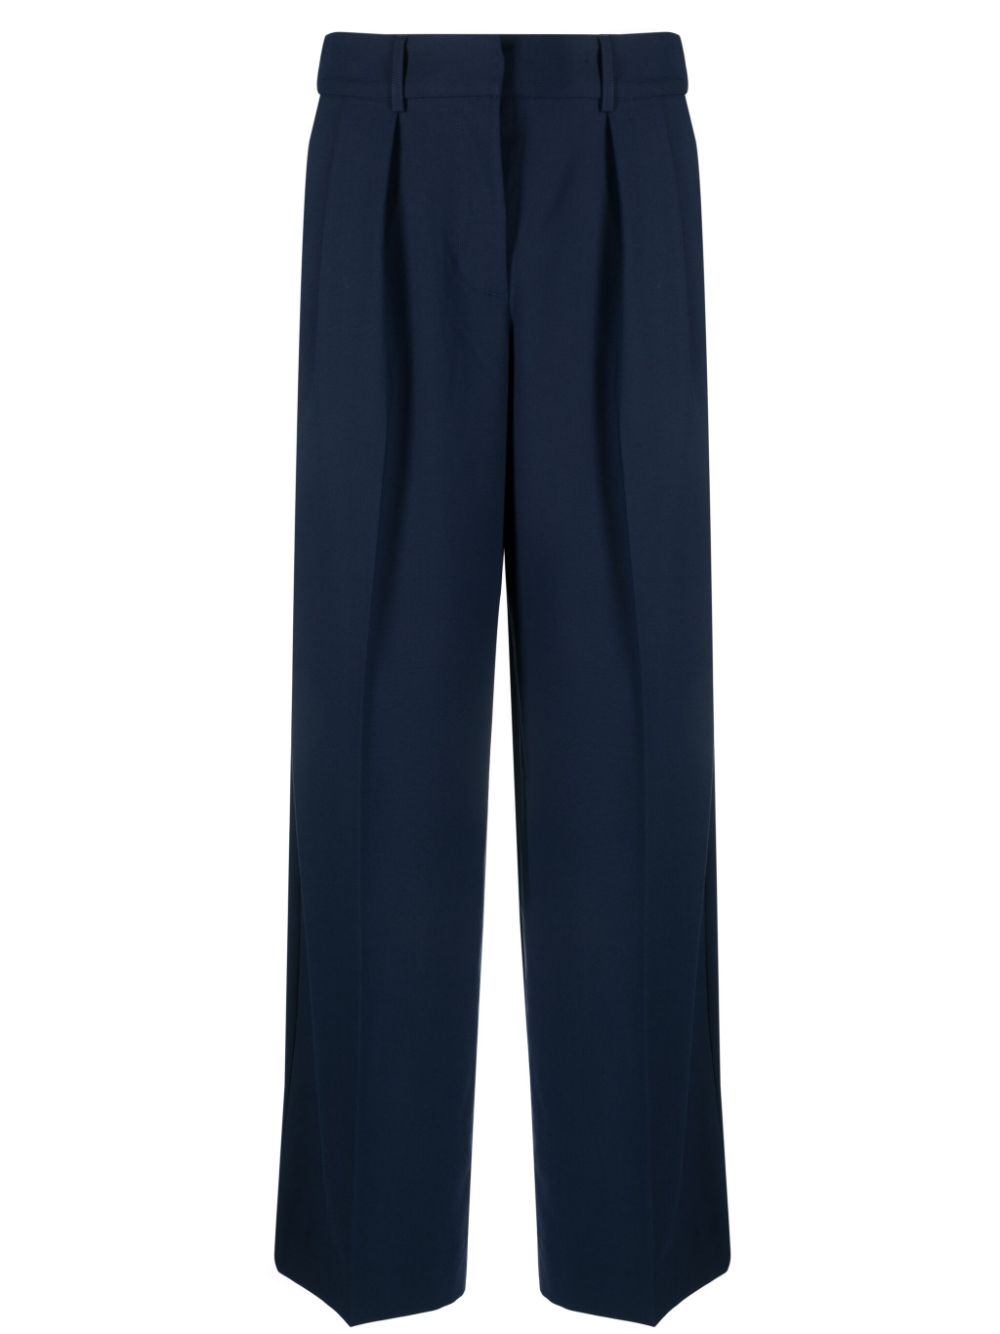 REMAIN pleated high-waist palazzo pant - Blue von REMAIN